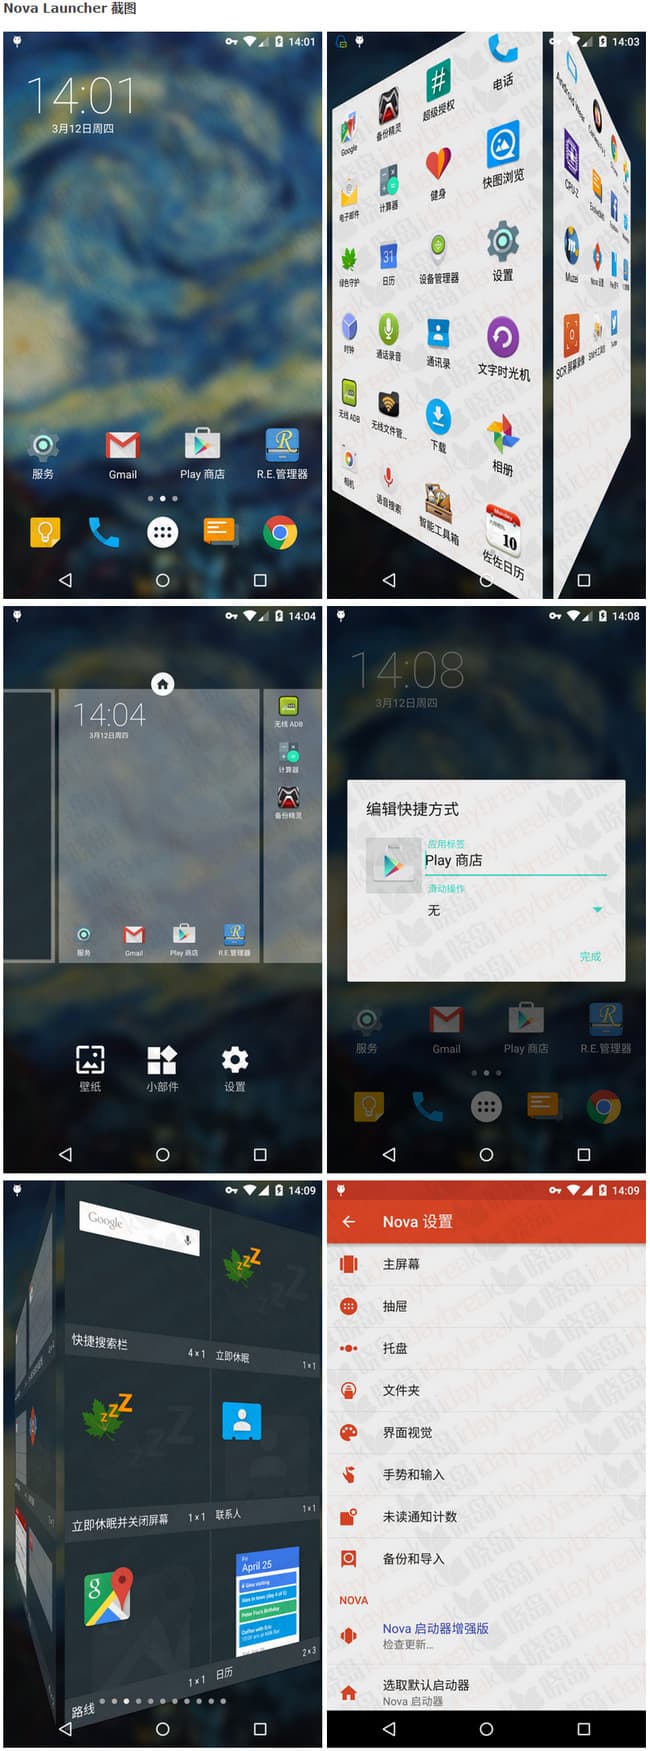 Nova Launcher_v7.0.56_Stable_<a href='https://www.678cn.com' target=_blank title='进入解锁相关页面' style='color:#AE0000;font-weight: bold;padding: 0 3px 0 3px;'>解锁</a>增强版